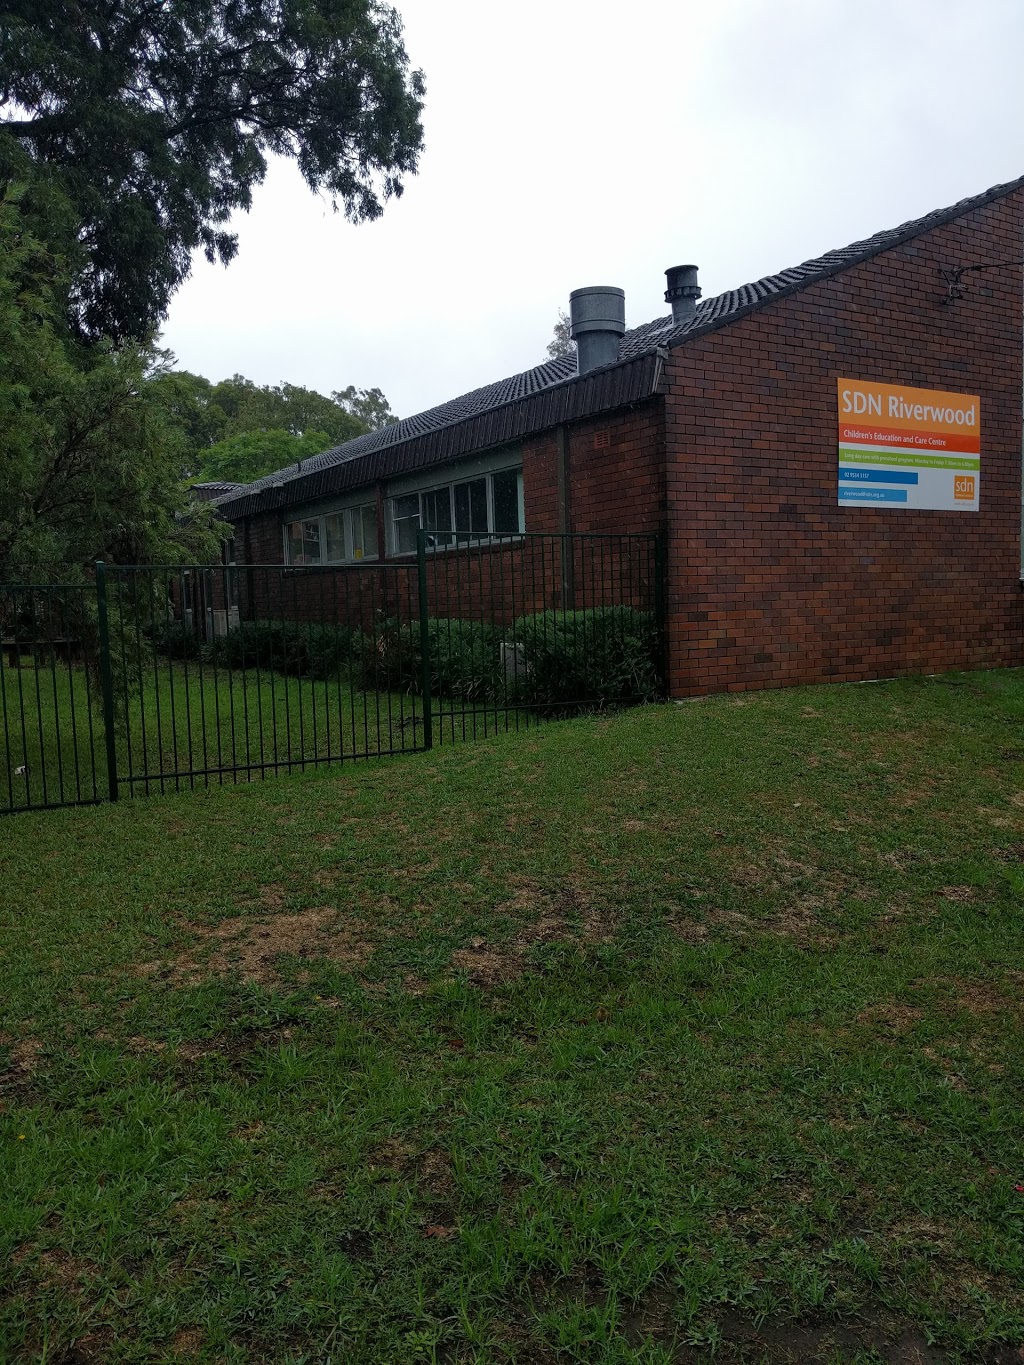 SDN Riverwood Childrens Education and Care Centre | school | 5 Belmore Rd, Riverwood NSW 2210, Australia | 0295747301 OR +61 2 9574 7301